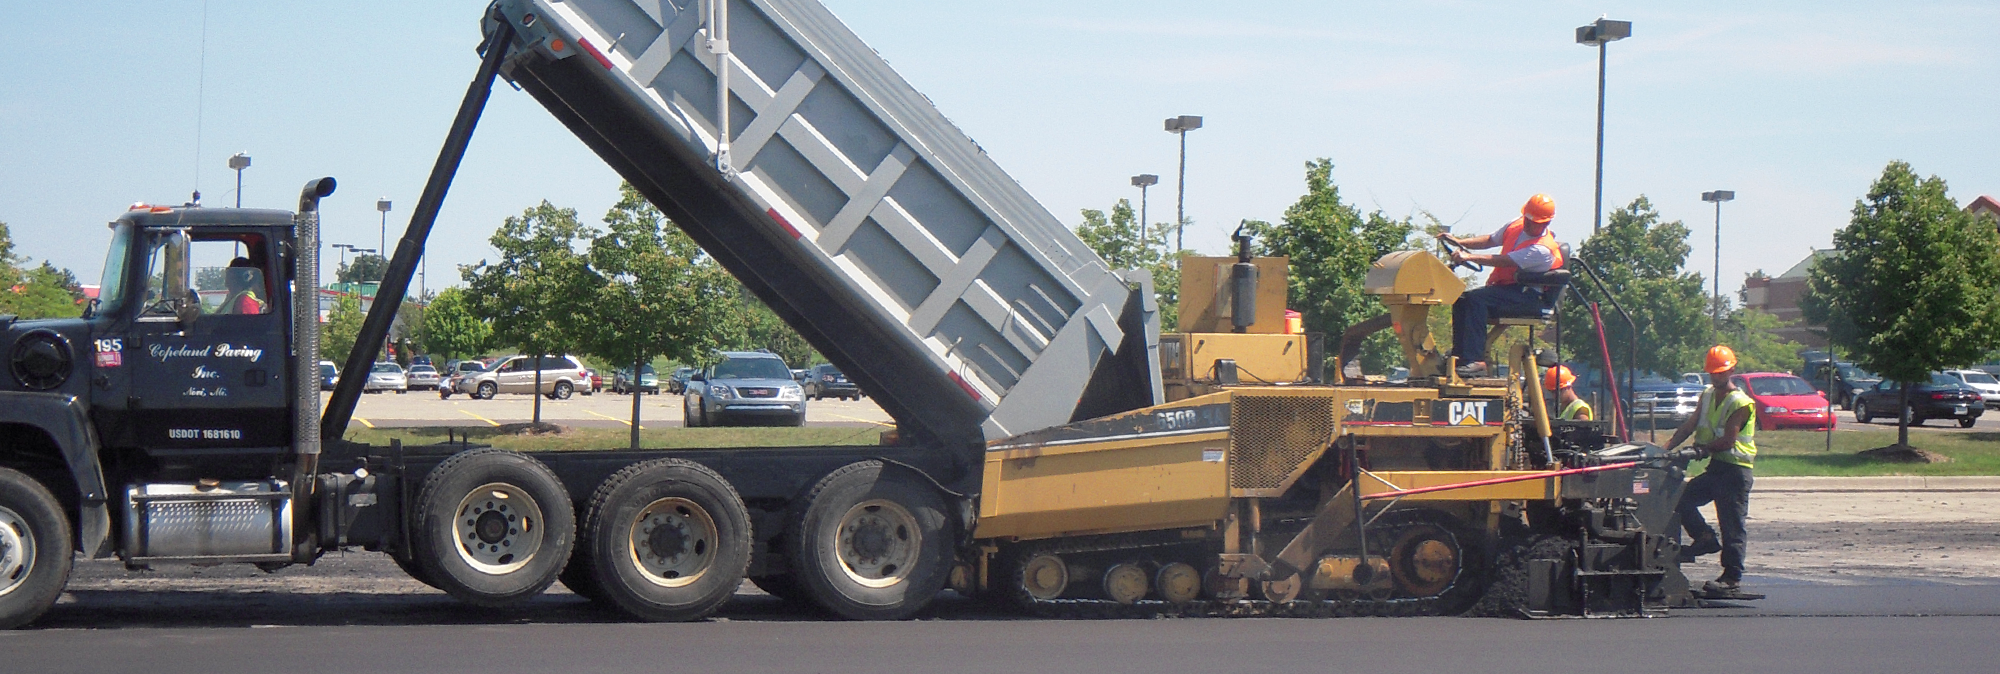 Workers on-site using Copeland Paving dump truck and paving equipment